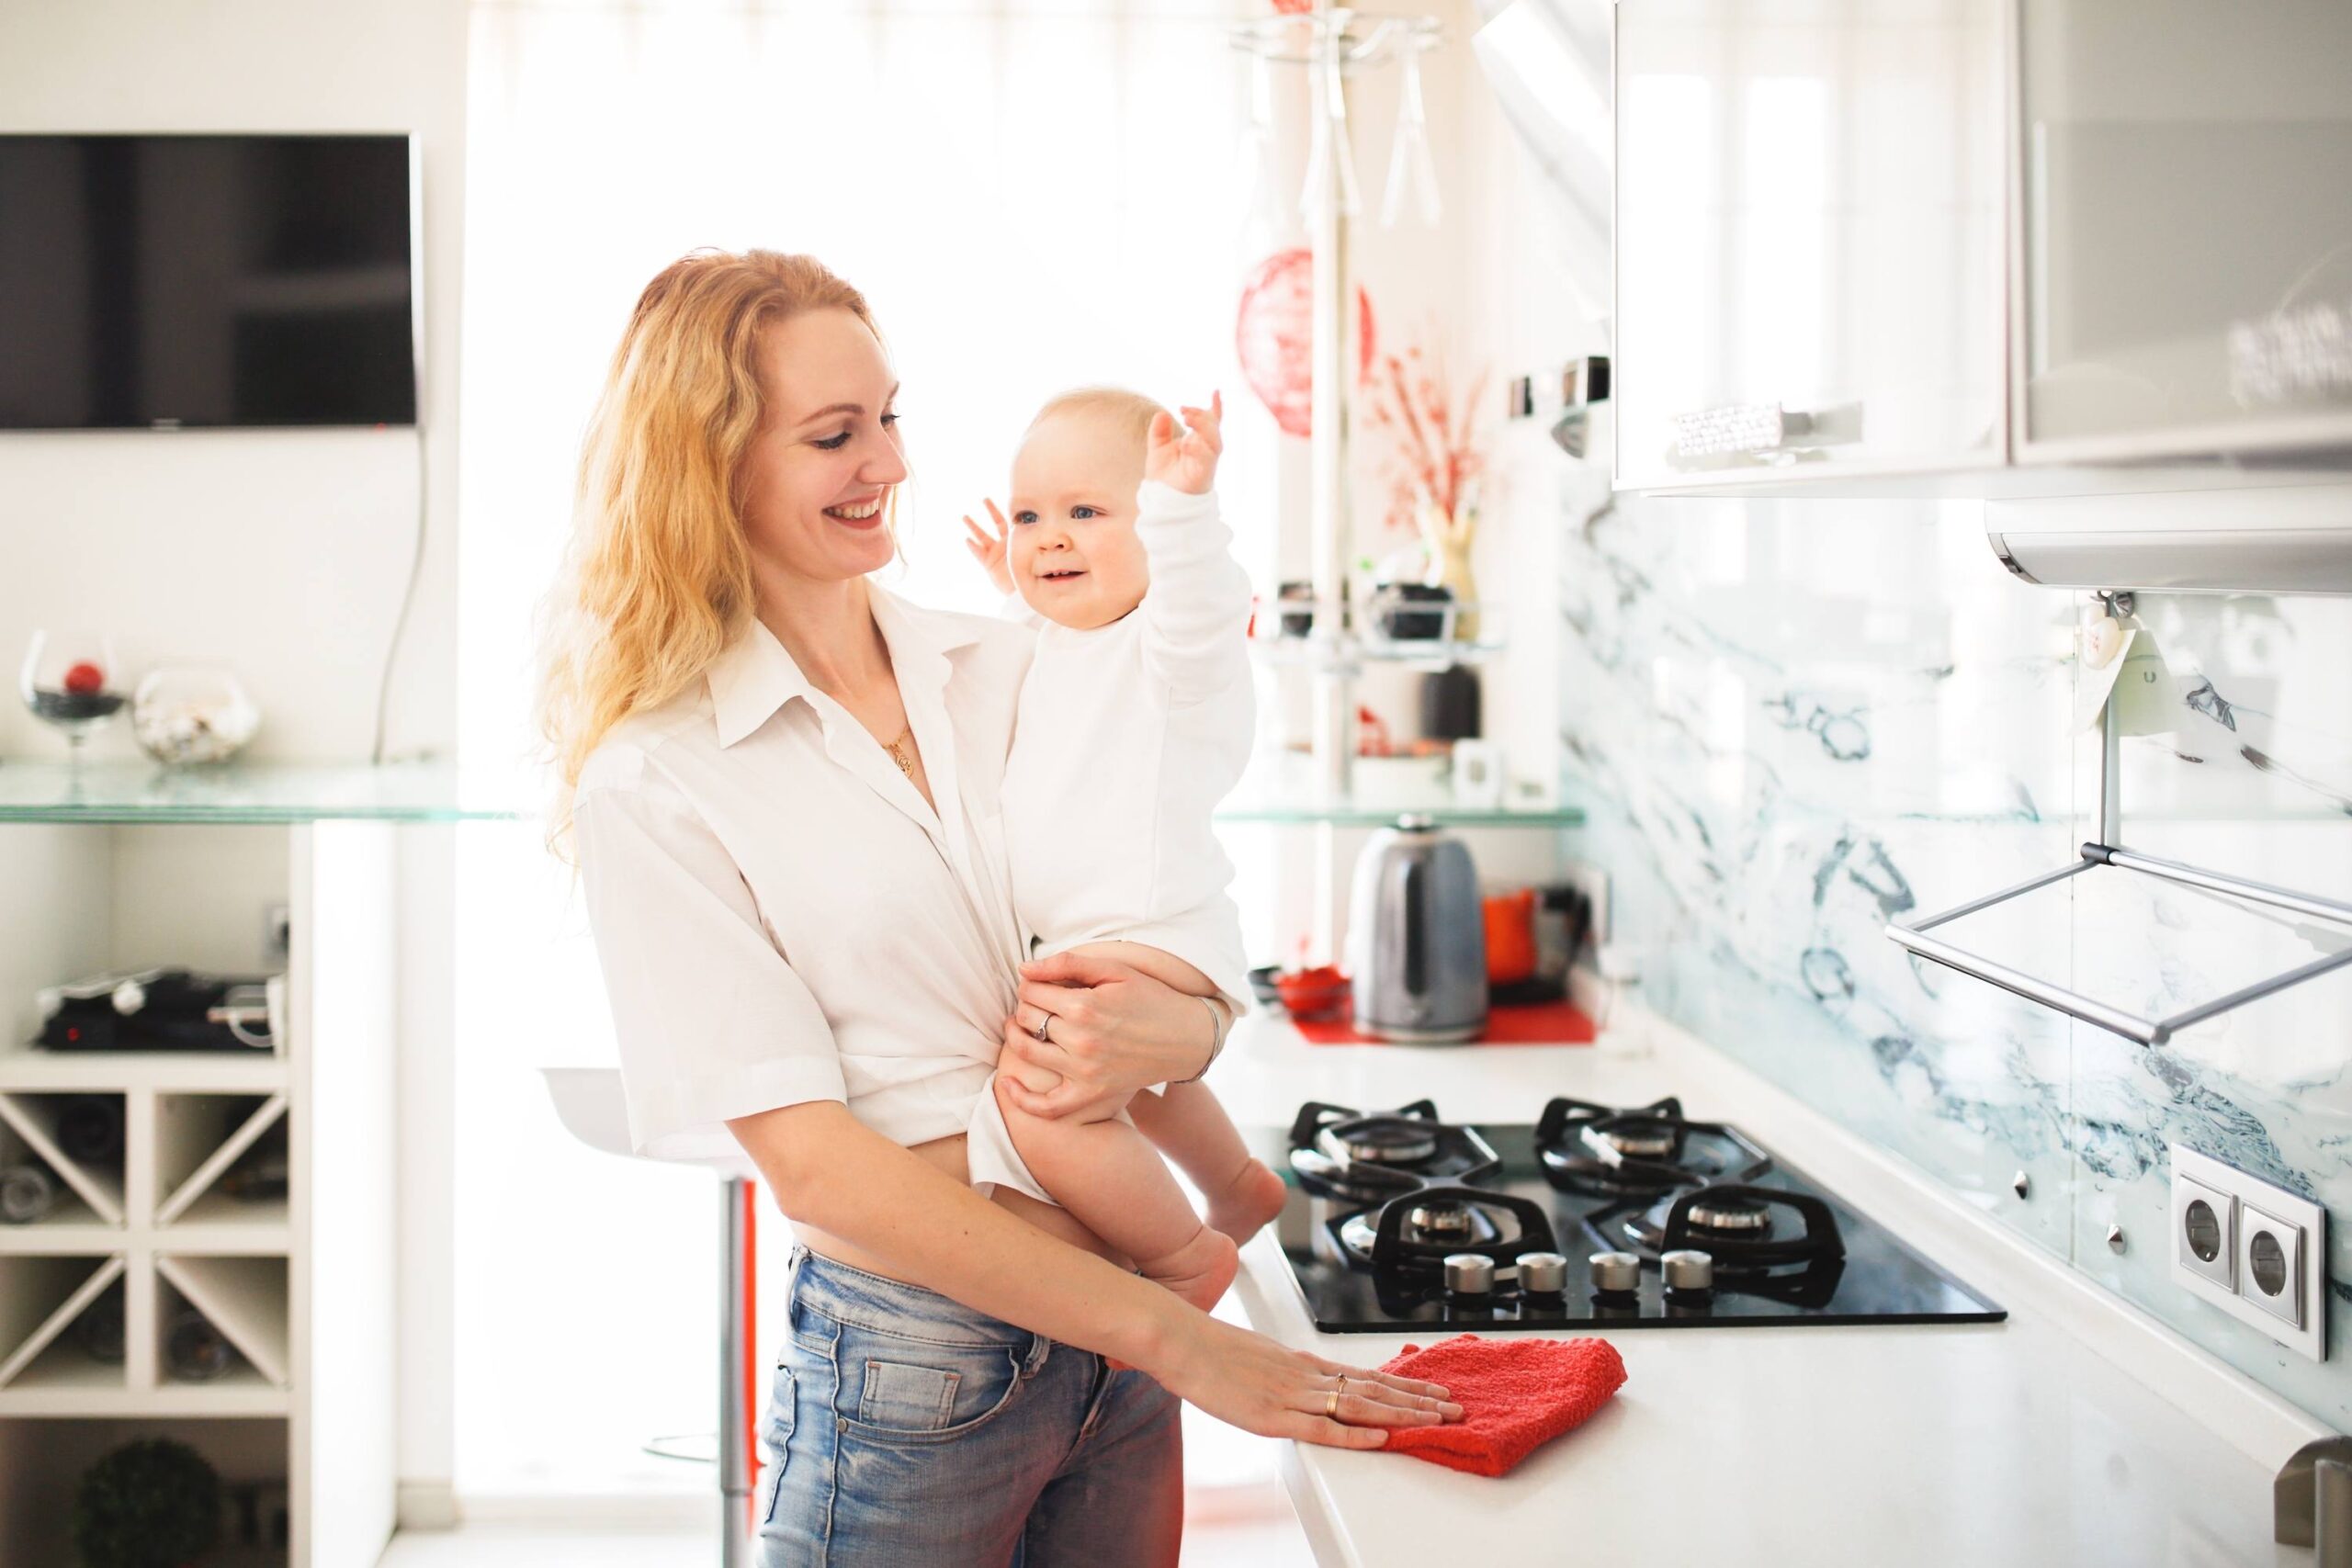 https://www.mother.ly/wp-content/uploads/2021/12/caucasian-mom-with-baby-in-her-arms-cleans-the-kitchen-in-the-house-mother-restores-order-wipes-the_t20_ZYvynR-scaled.jpg